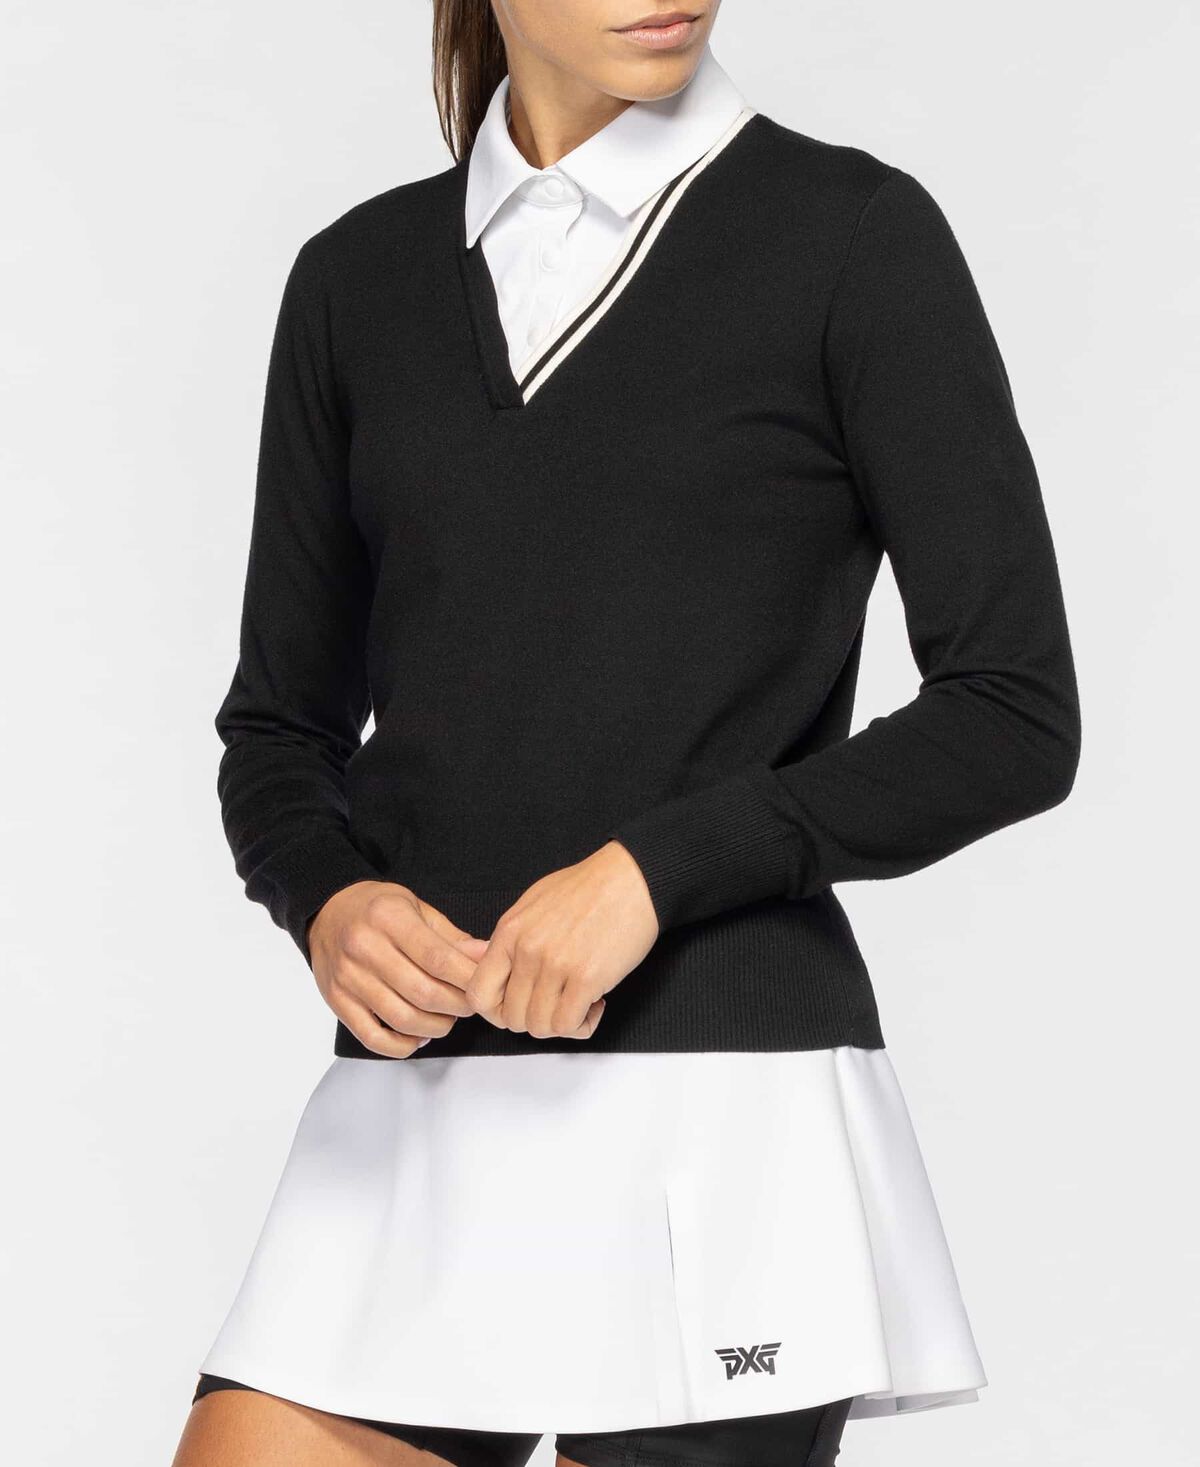 Women's Collared Two-In-One Sweater - Black - Small 